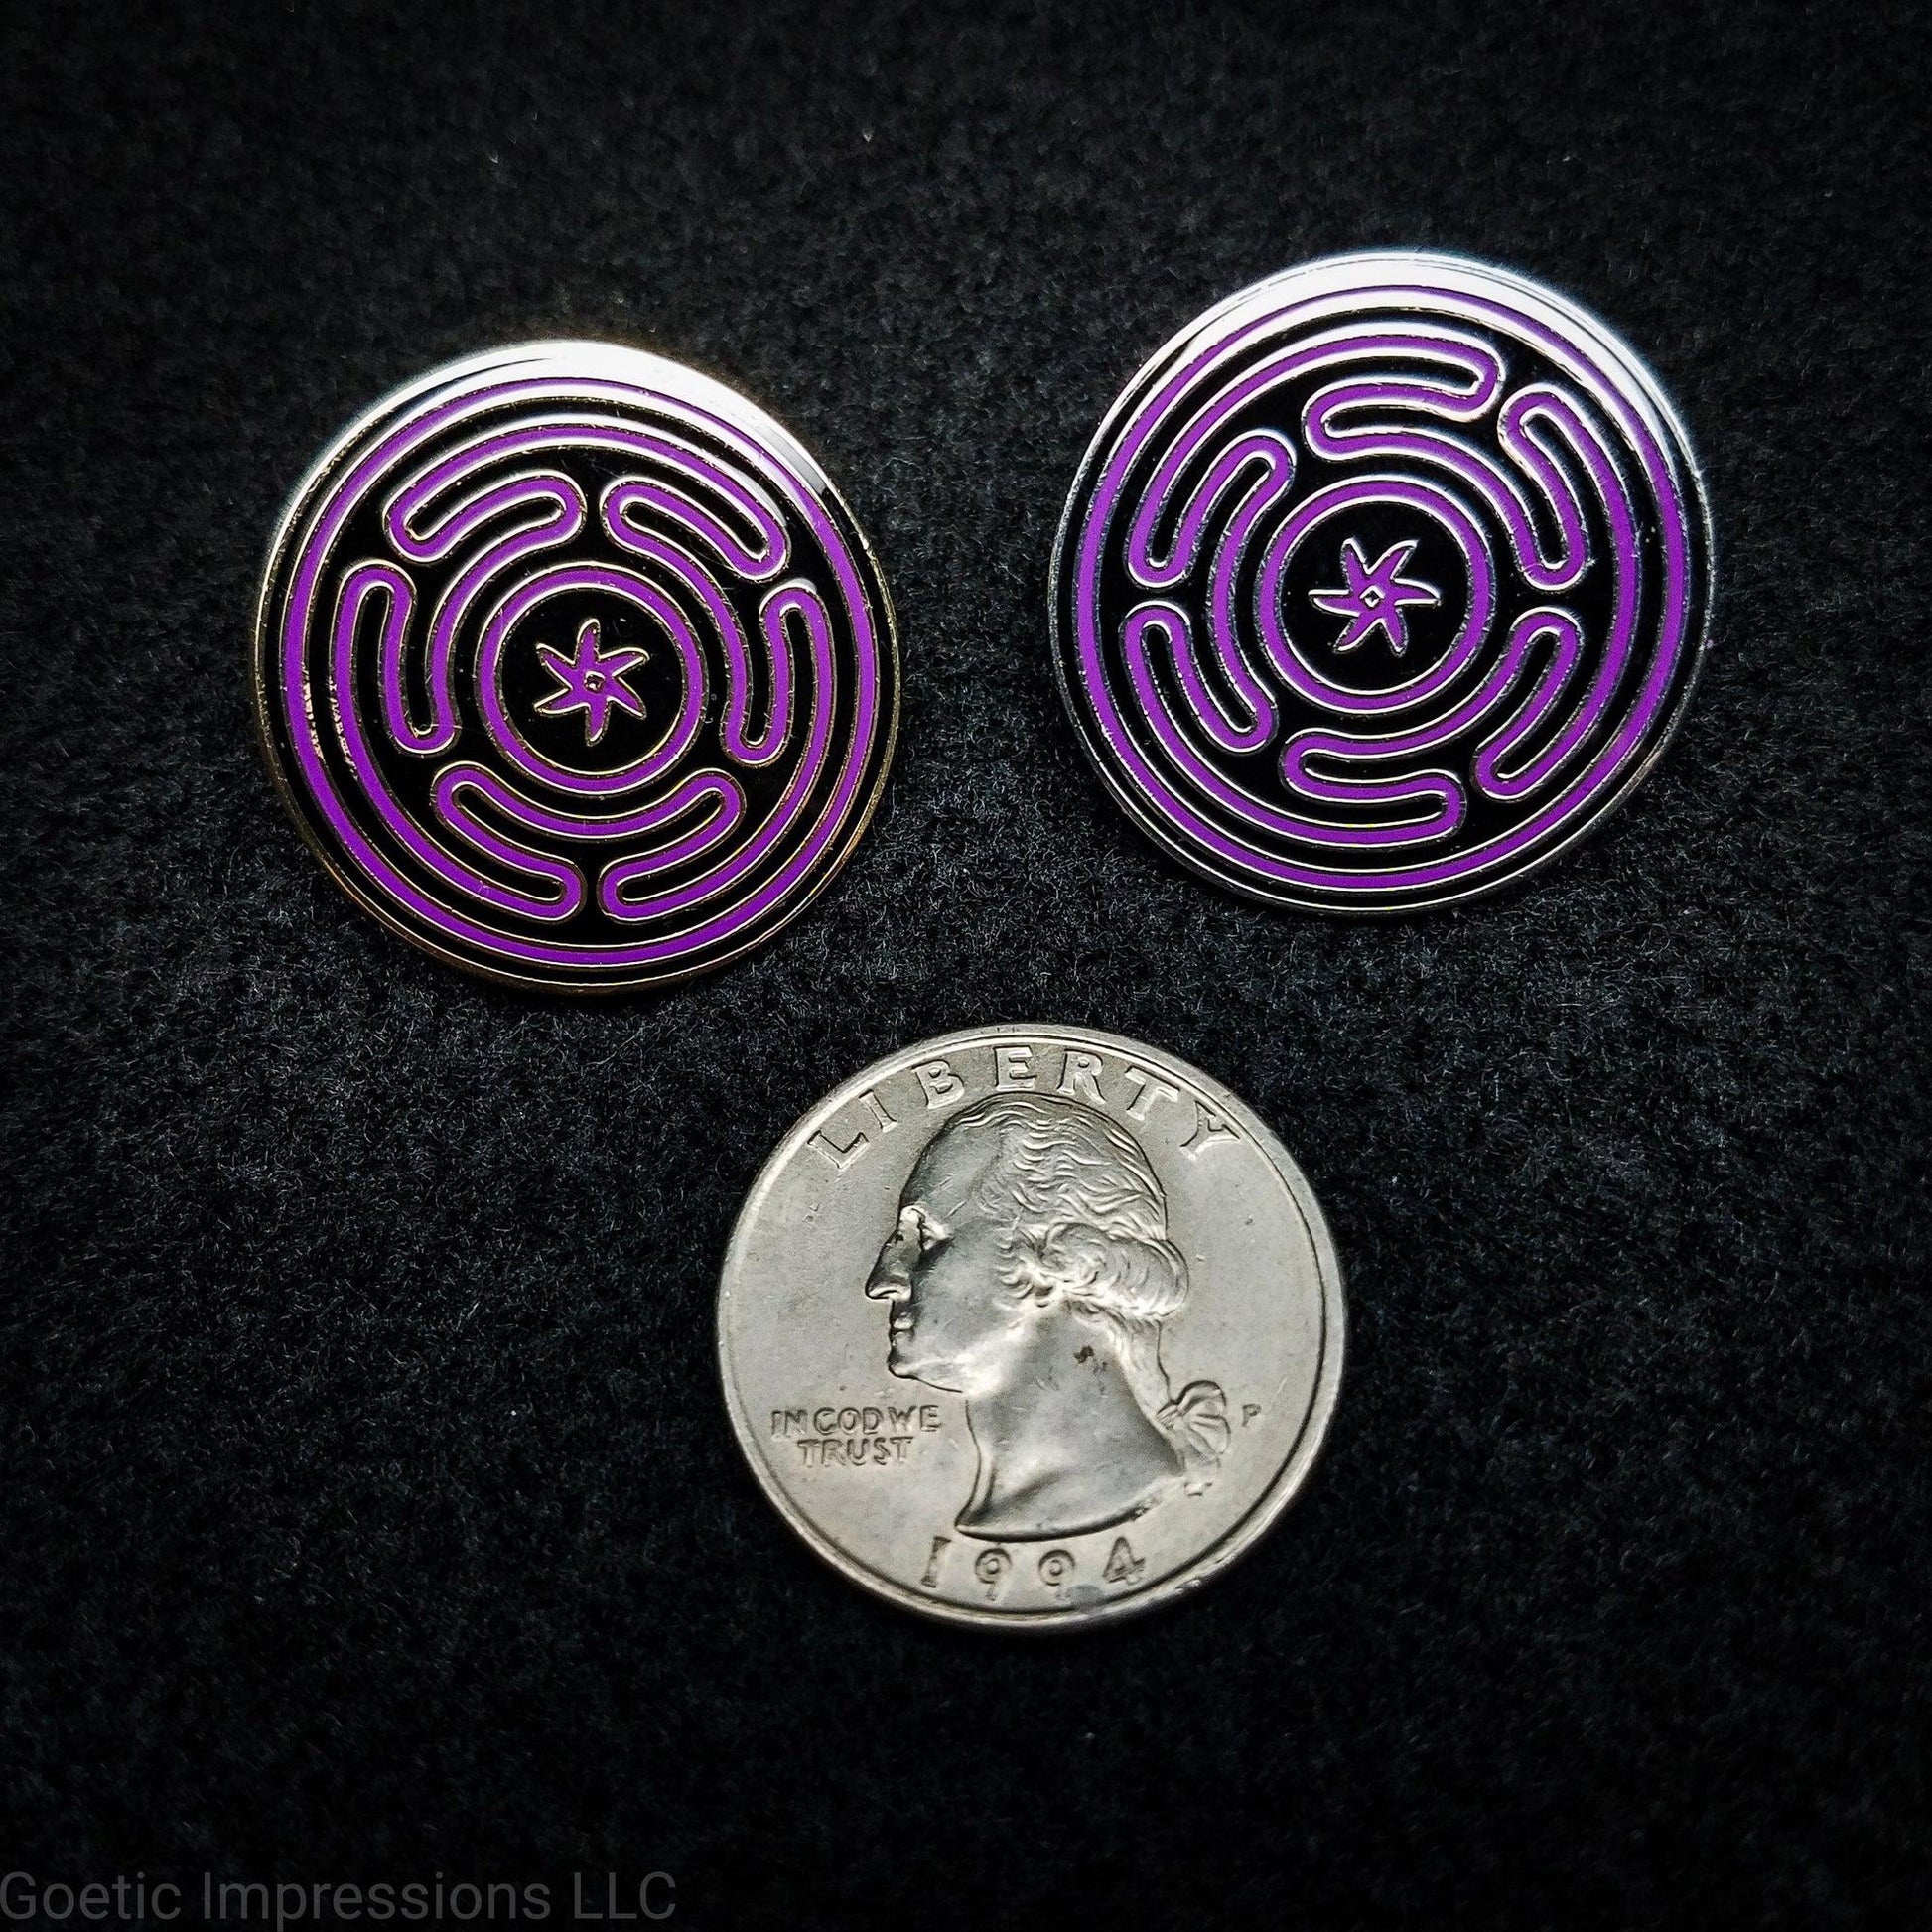 Two hard enamel pins featuring the Strophlos or Wheel of Hecate sigil. The sigil itself is colored in purple on a black background. The pins come in silver or gold plating. The pins are the same size as a quarter.